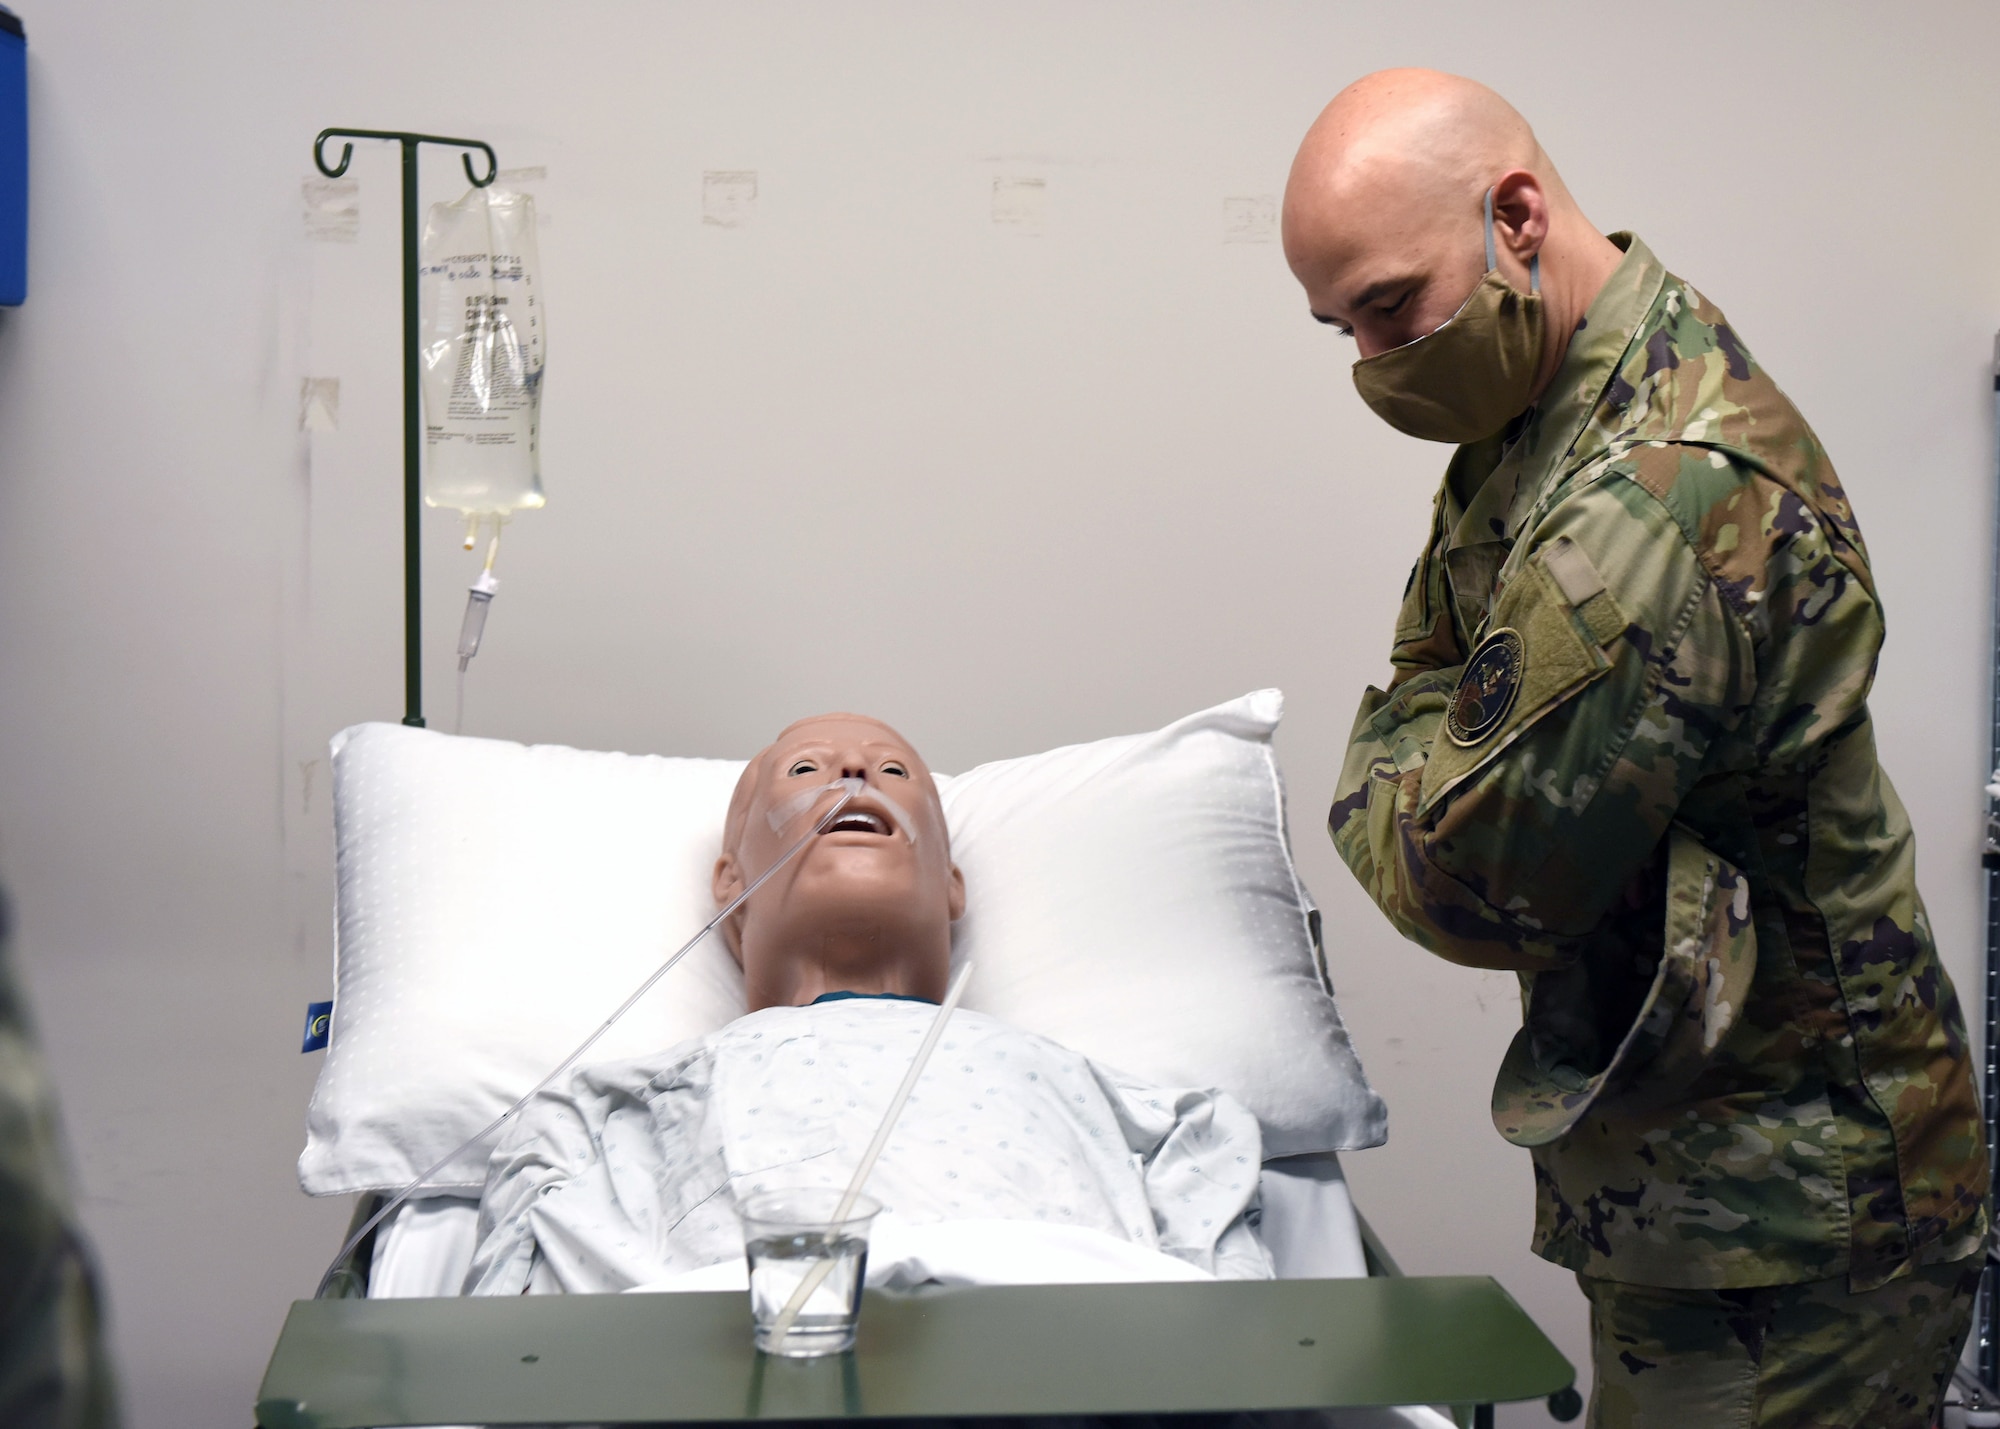 Chief Master Sgt. Robert Devall, 460th Space Wing command chief, looks at a mannequin at the Human Performance Center on Buckley Air Force Base, Colo., May 6, 2020. The 460th Medical Group personnel participated in simulation training scenarios to brush up on their inpatient skills. Chief Devall attended the training to see how the training works first-hand. (U.S. Air Force photo by Airman 1st Class Haley N. Blevins)